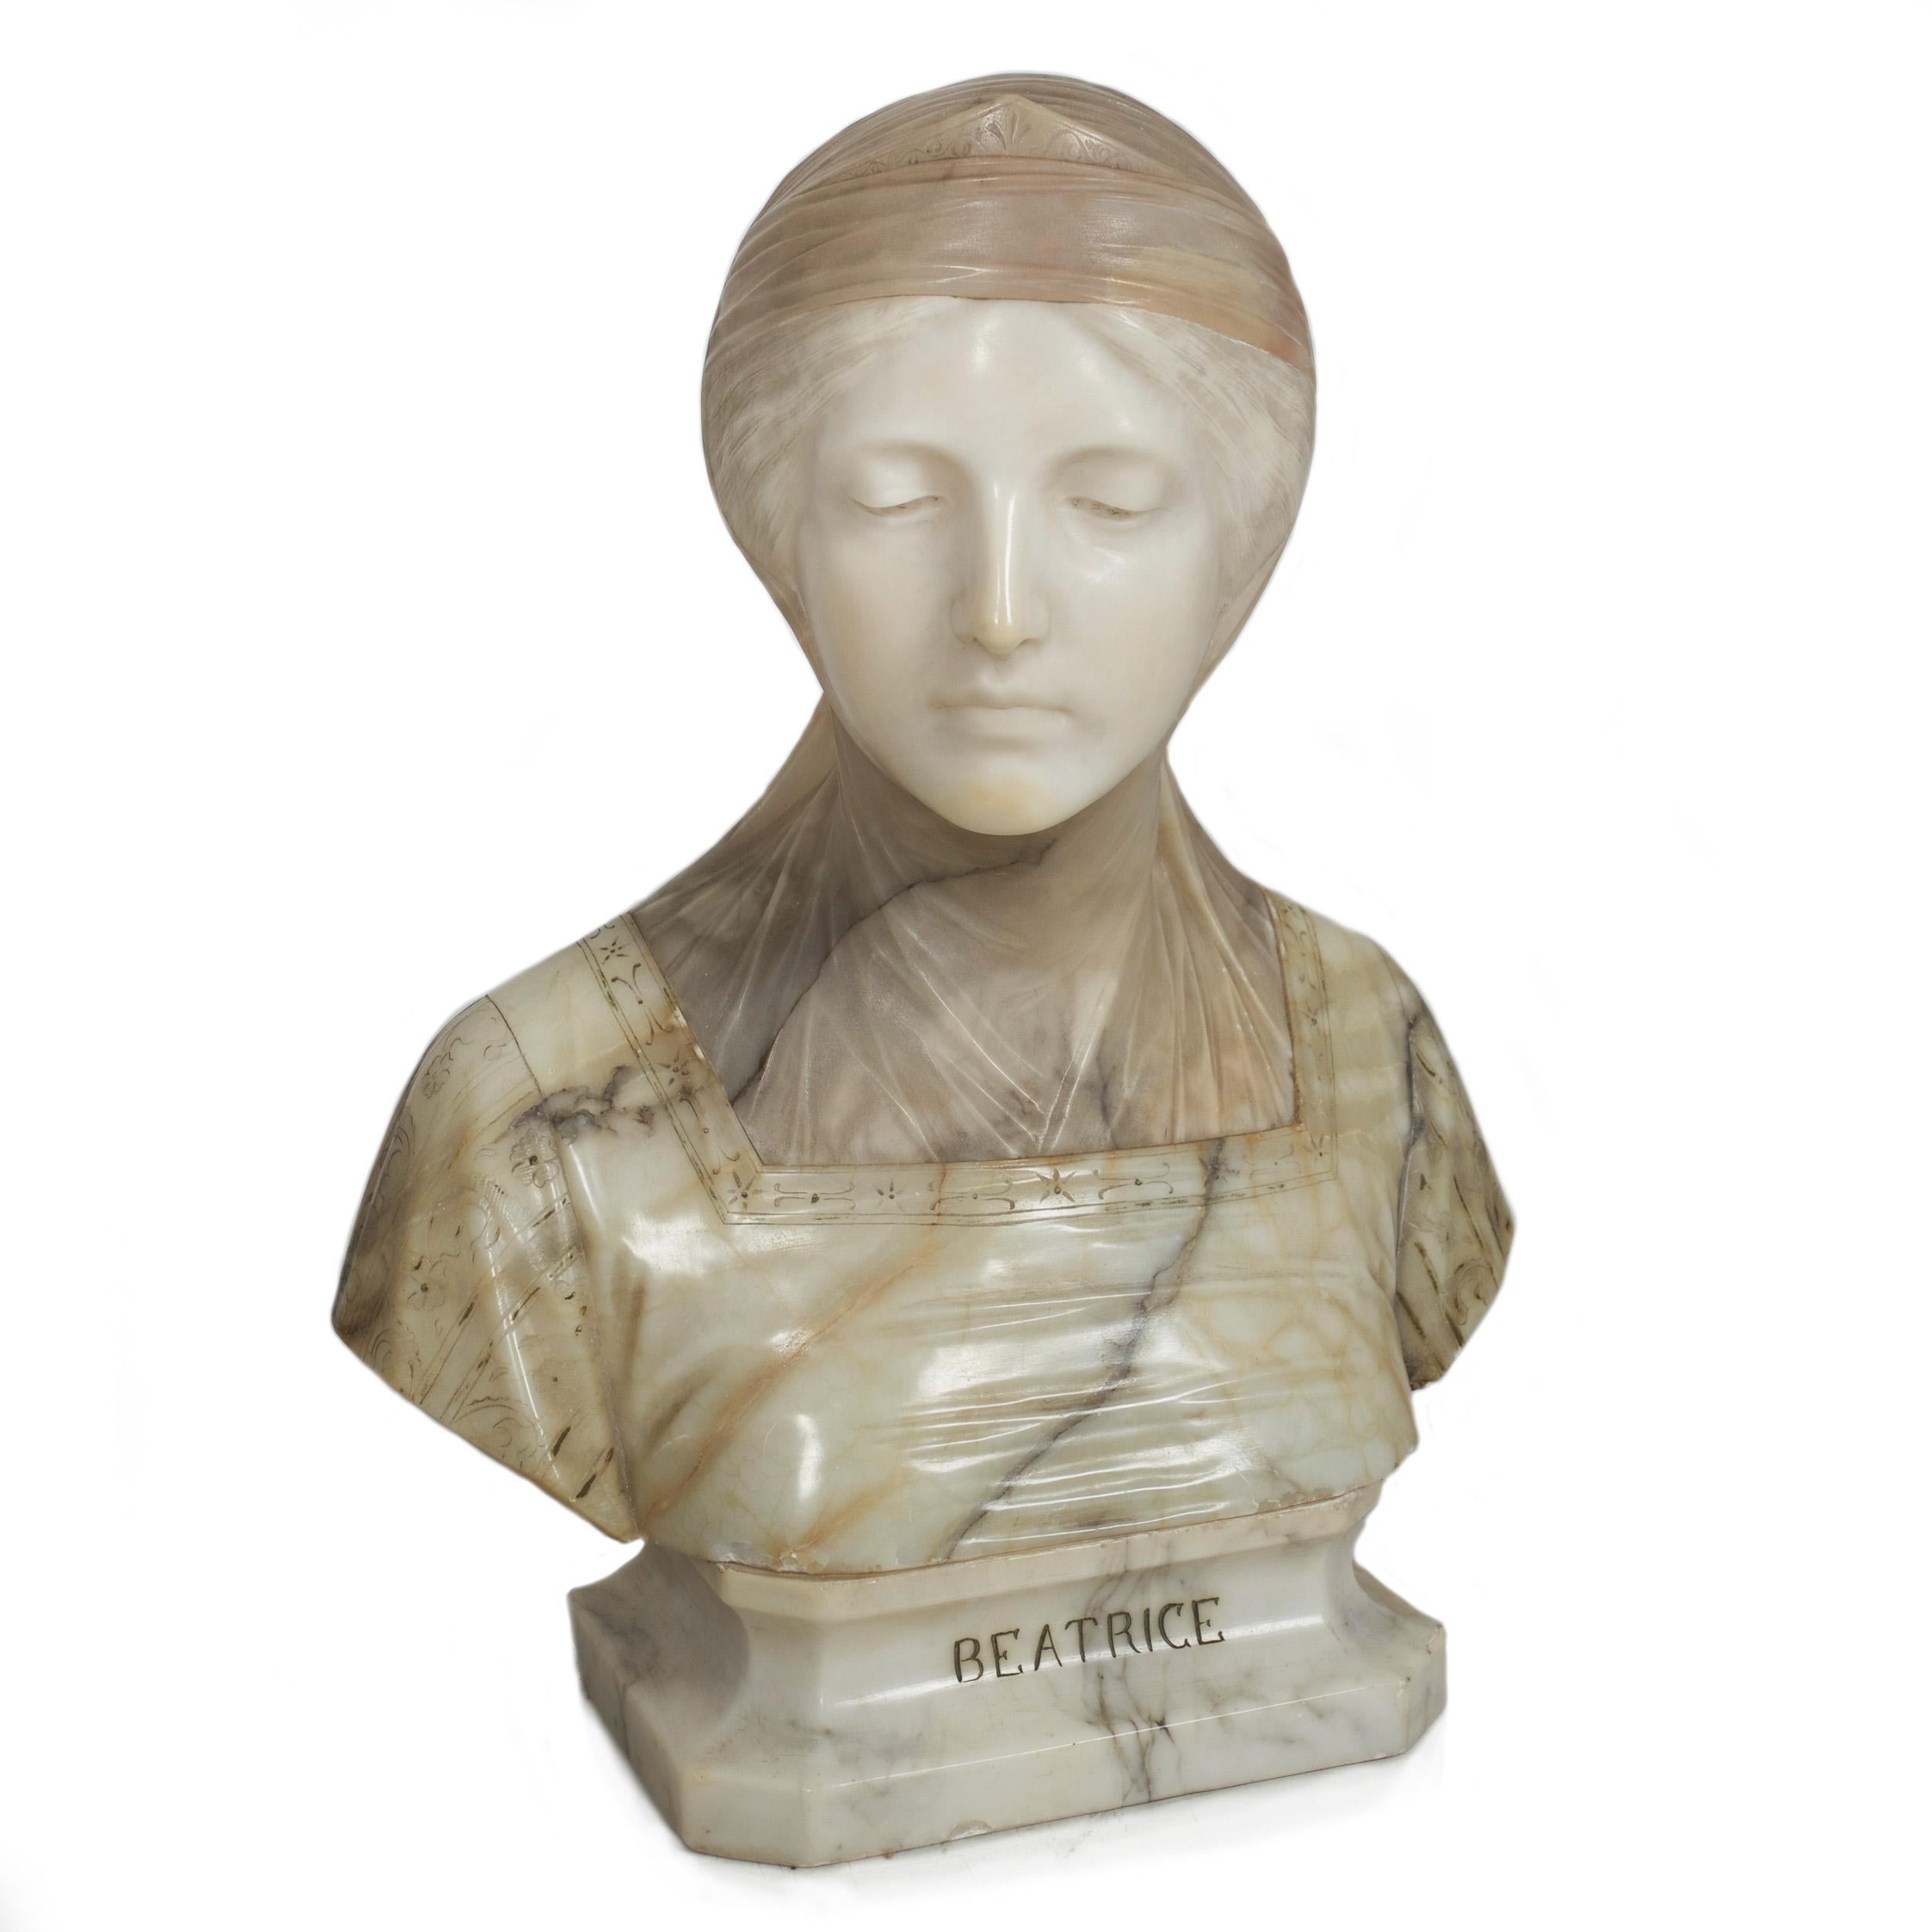 A beautifully carved alabaster bust of Dante Alighieri's muse, Beatrice, executed by Giuseppe Bessi. Typical of his sensitive works, the present model features four blocks of the stone selected for their color profiles: the base, the garment, the